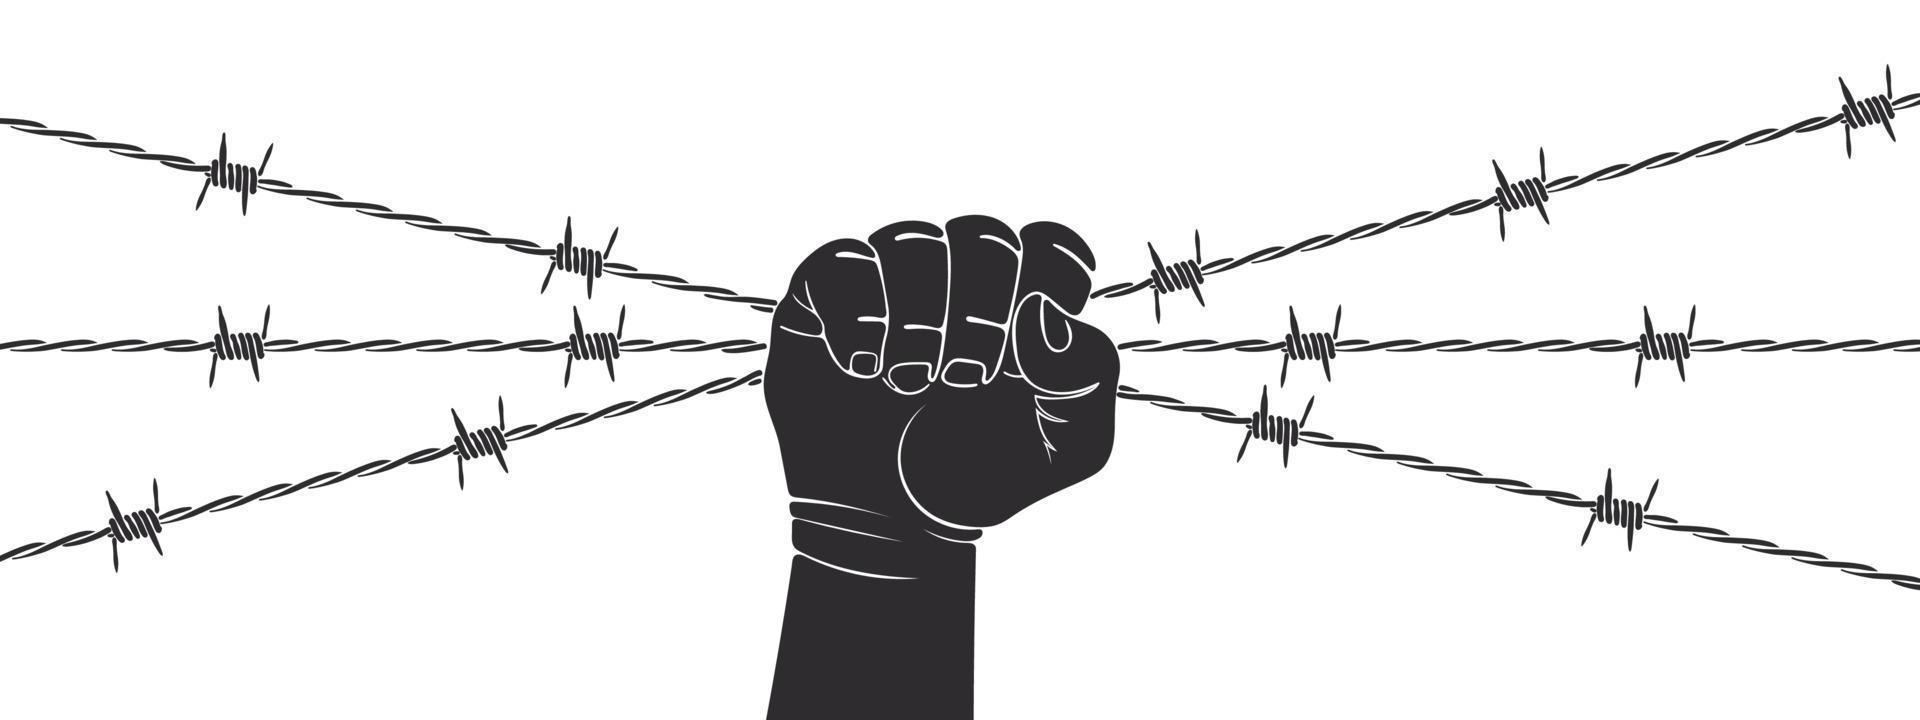 Razor wire and hand. Human hand squeezing barbed wire. Vector scalable graphics